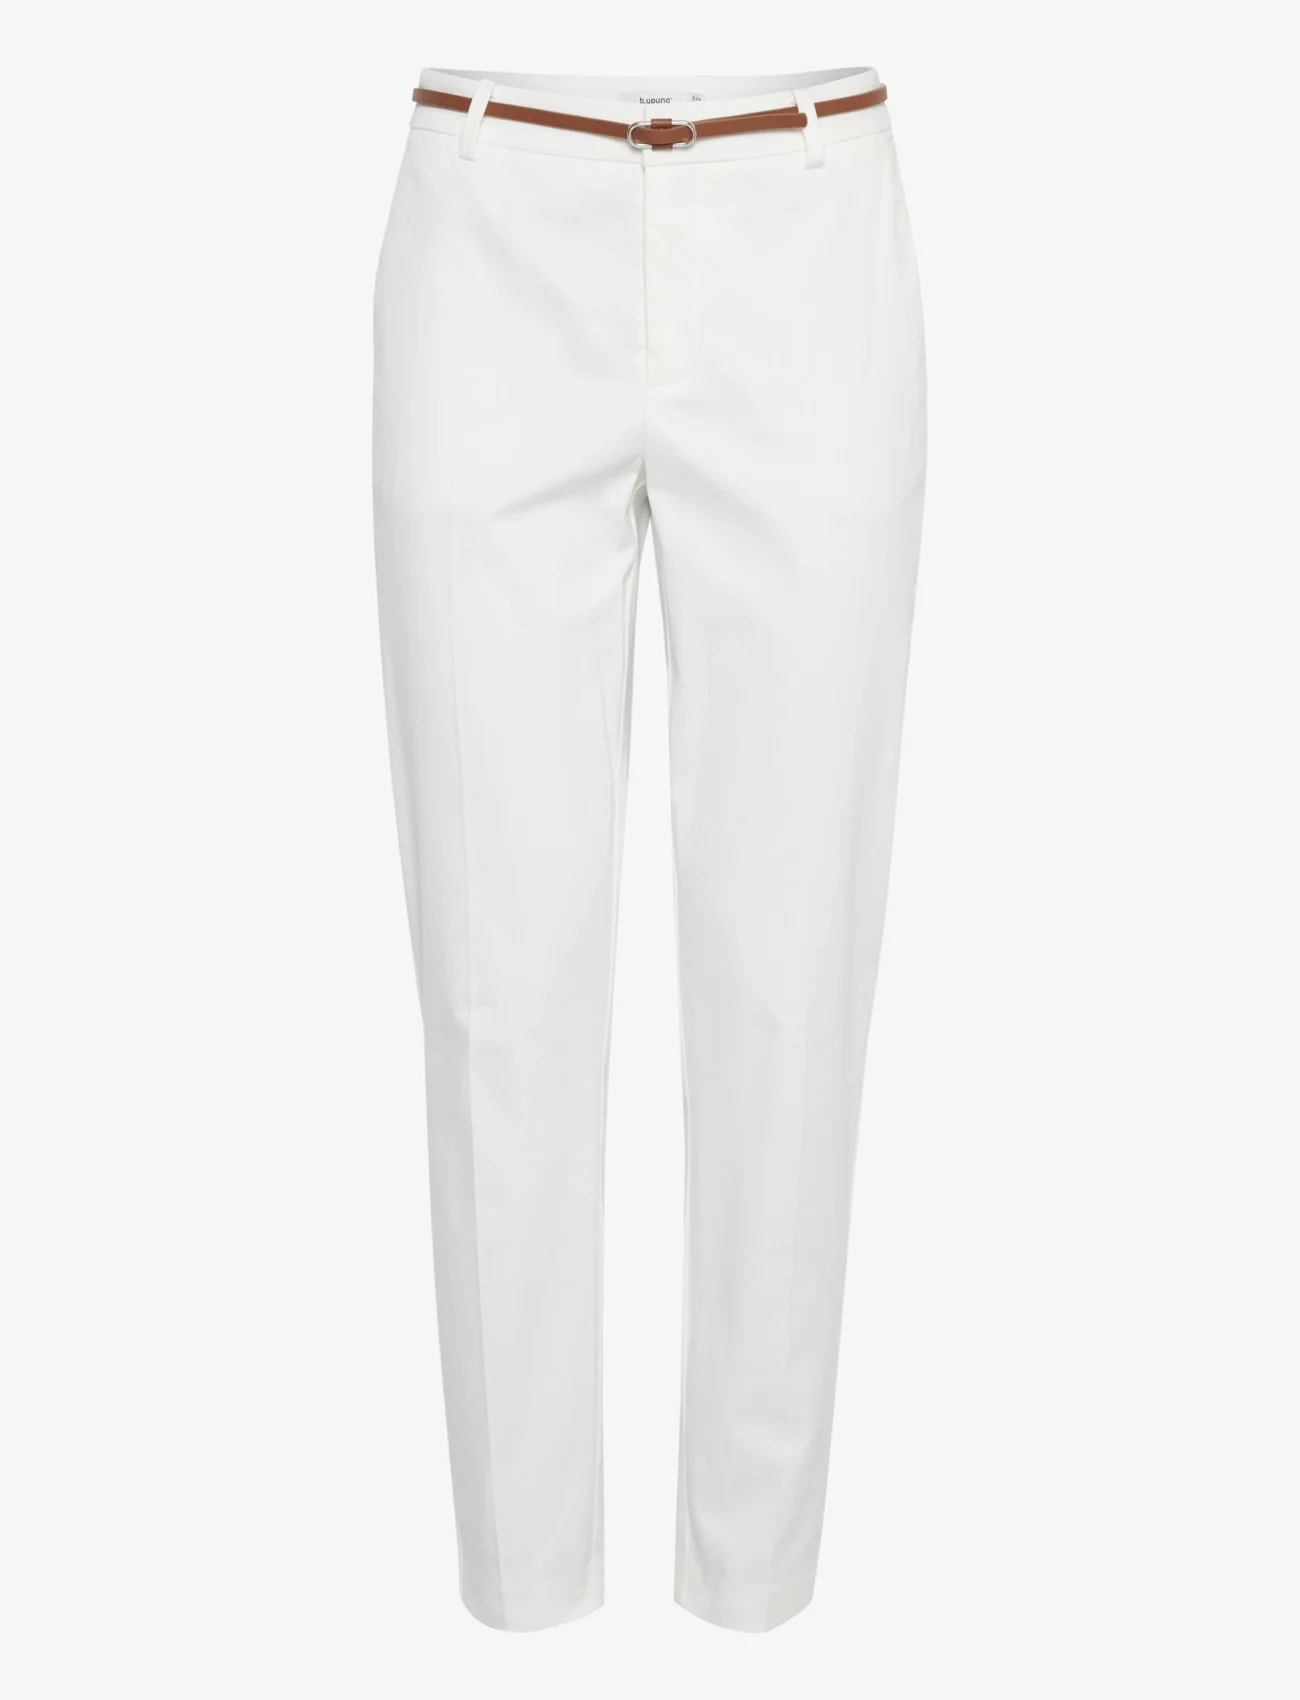 b.young - BYDAYS CIGARET PANTS 2 - - juhlamuotia outlet-hintaan - off white - 0